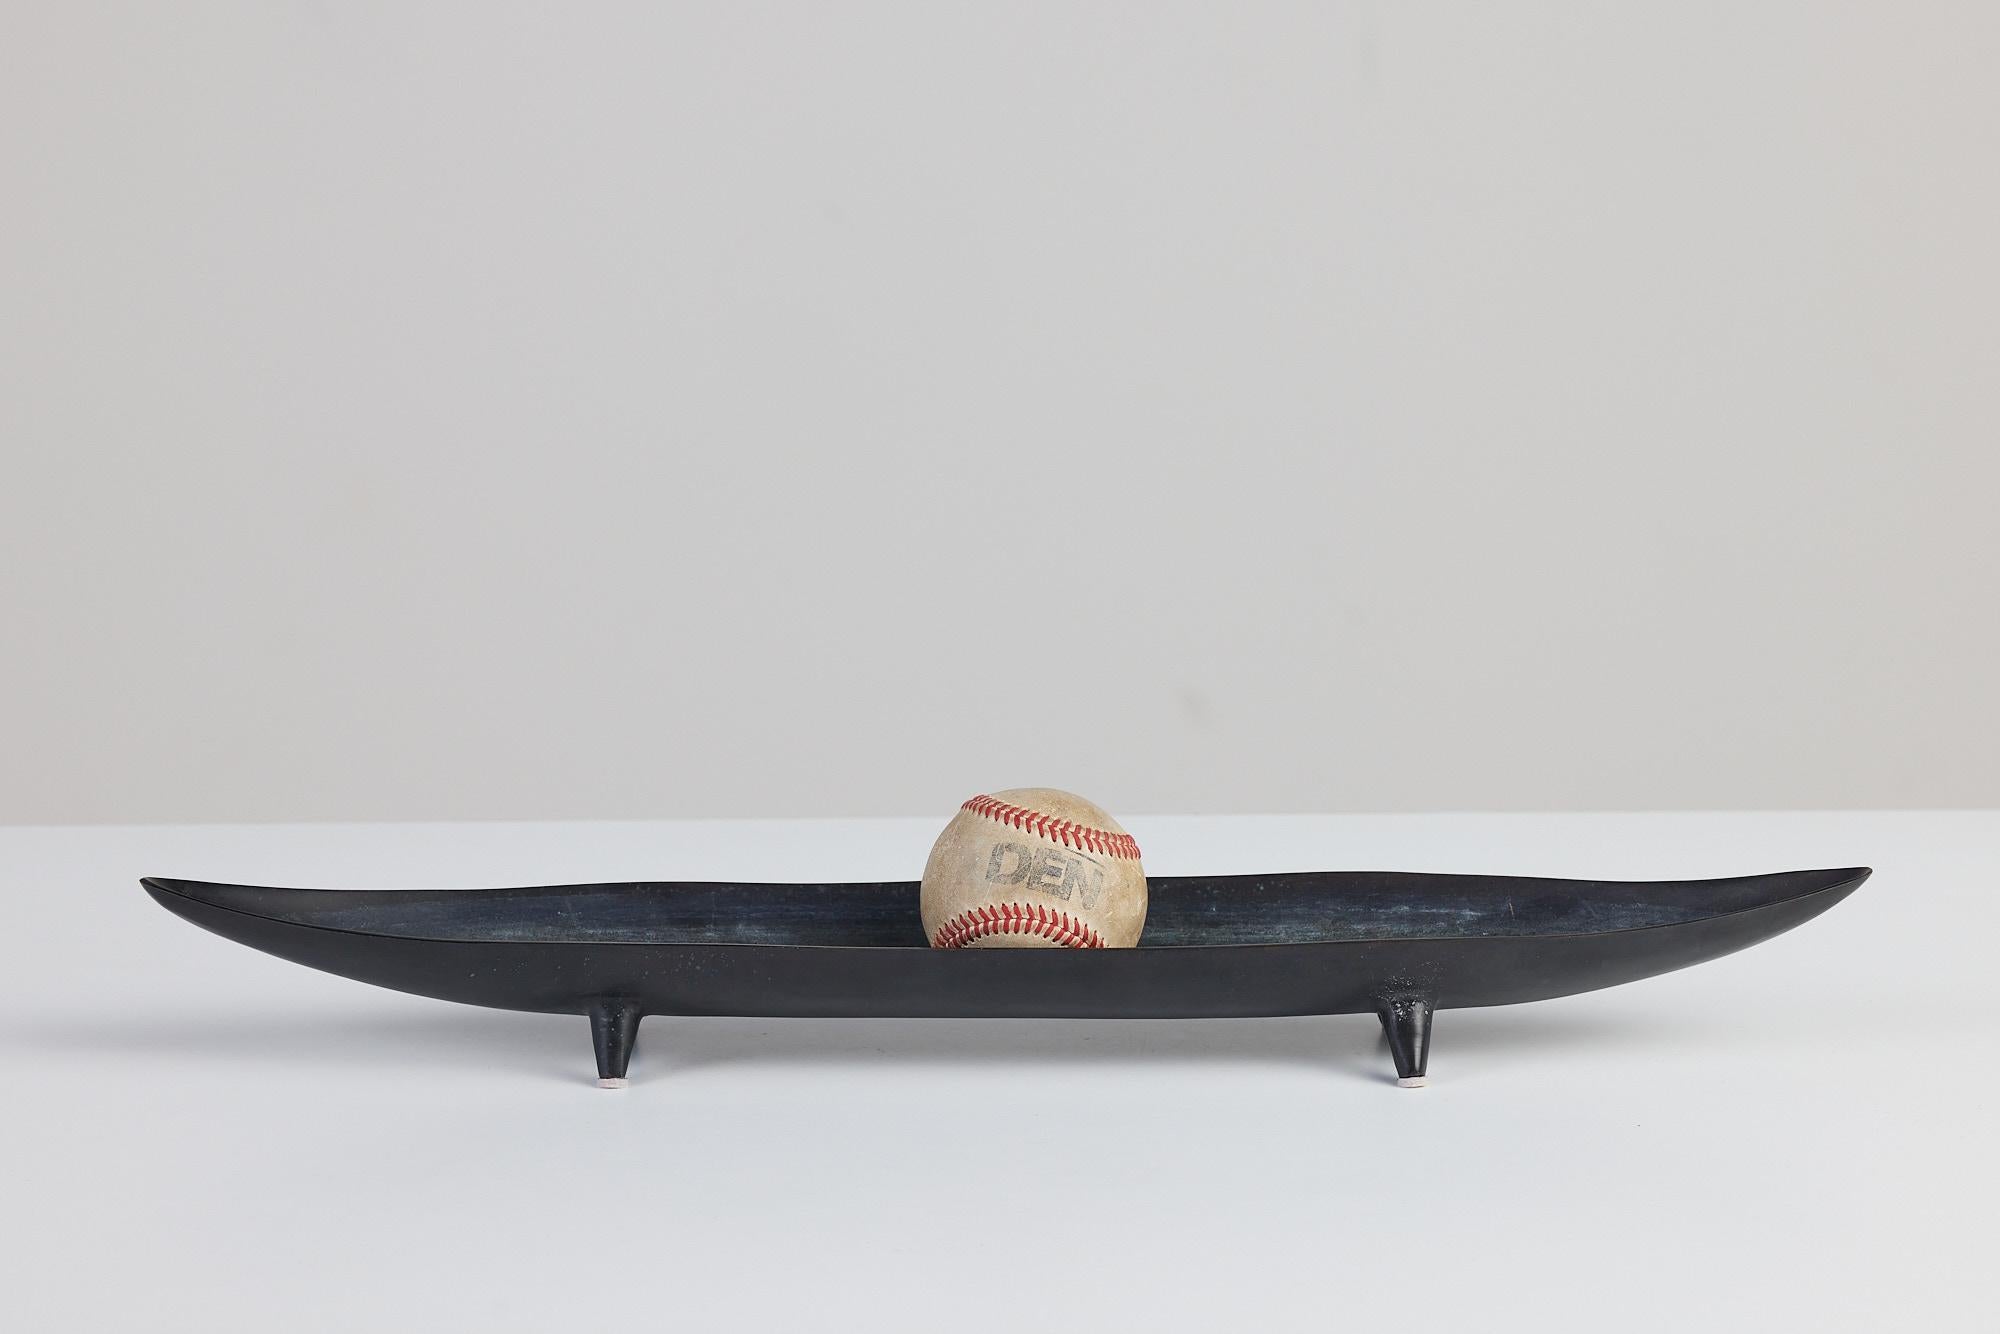 A black oxidized metal footed bowl. This bowl features a rectangular shape with pointed edges resembling a canoe or baguette. It would be a gorgeous decorative piece or serveware.

Dimensions: 21.75